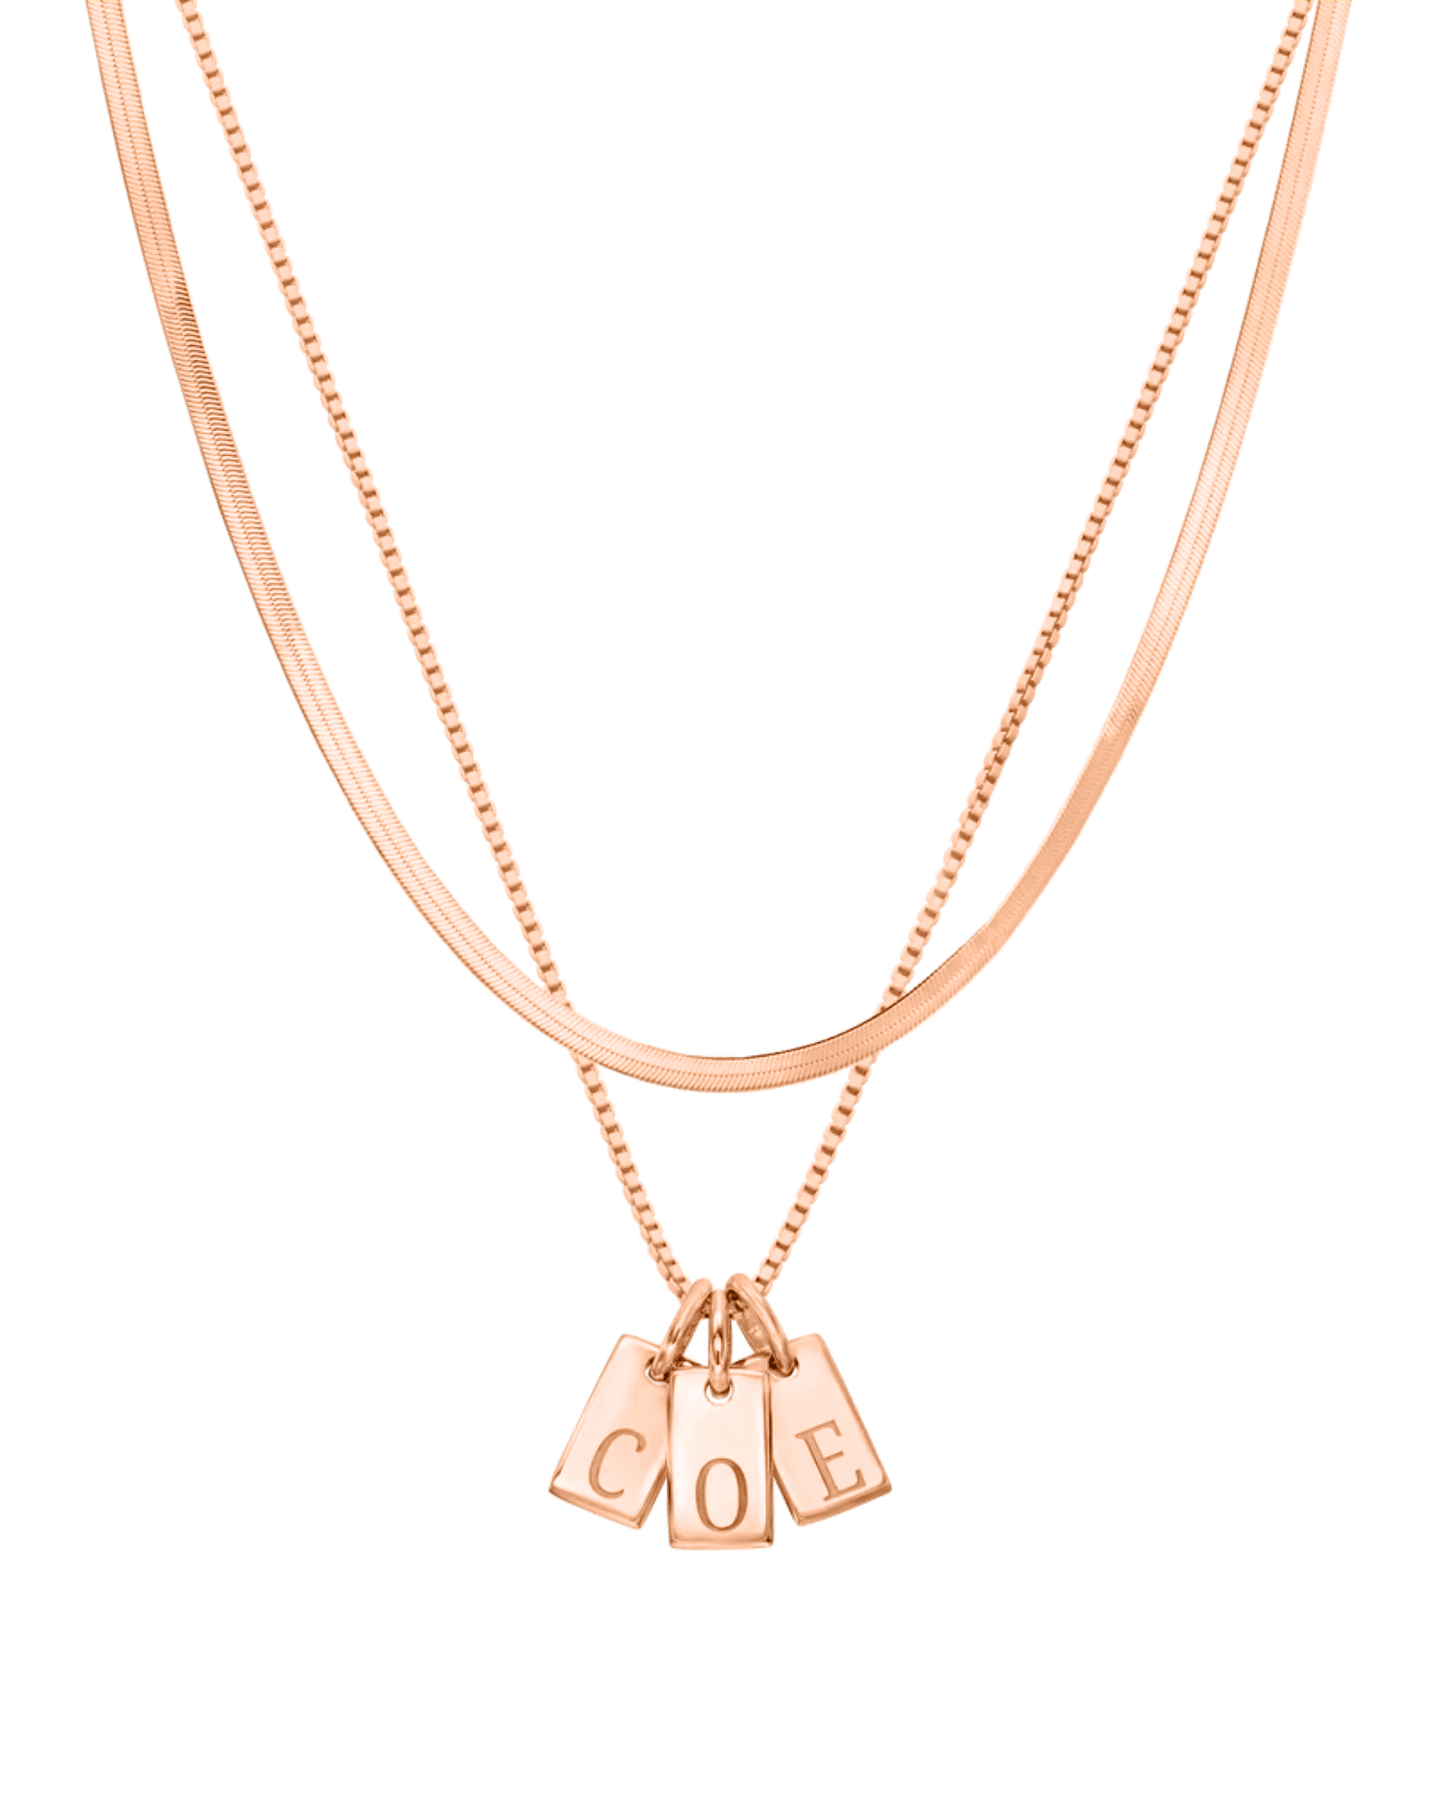 Set of Initial Mini Dogtag & Herringbone Chain Necklaces - 18K Rose Vermeil Necklaces magal-dev 1 Tag 